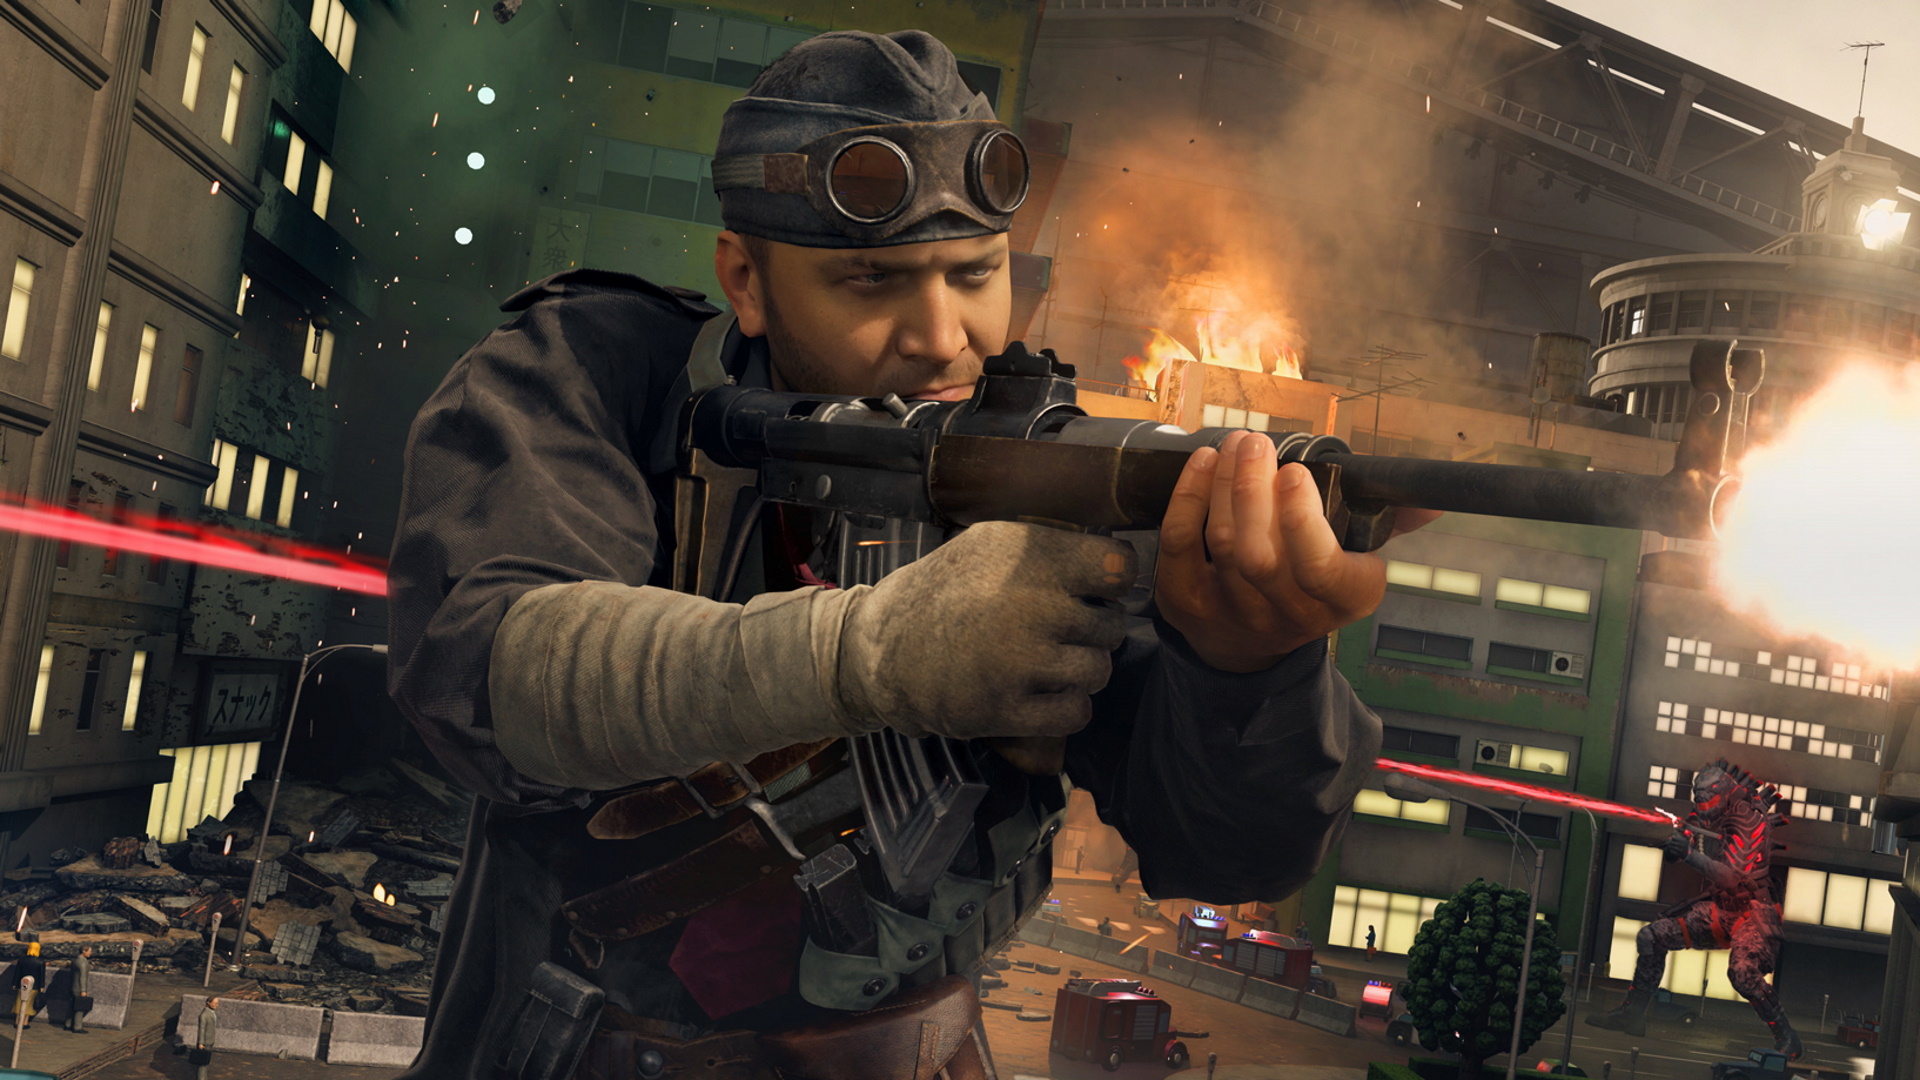 Warzone download - A character on crowded streets fires a gun